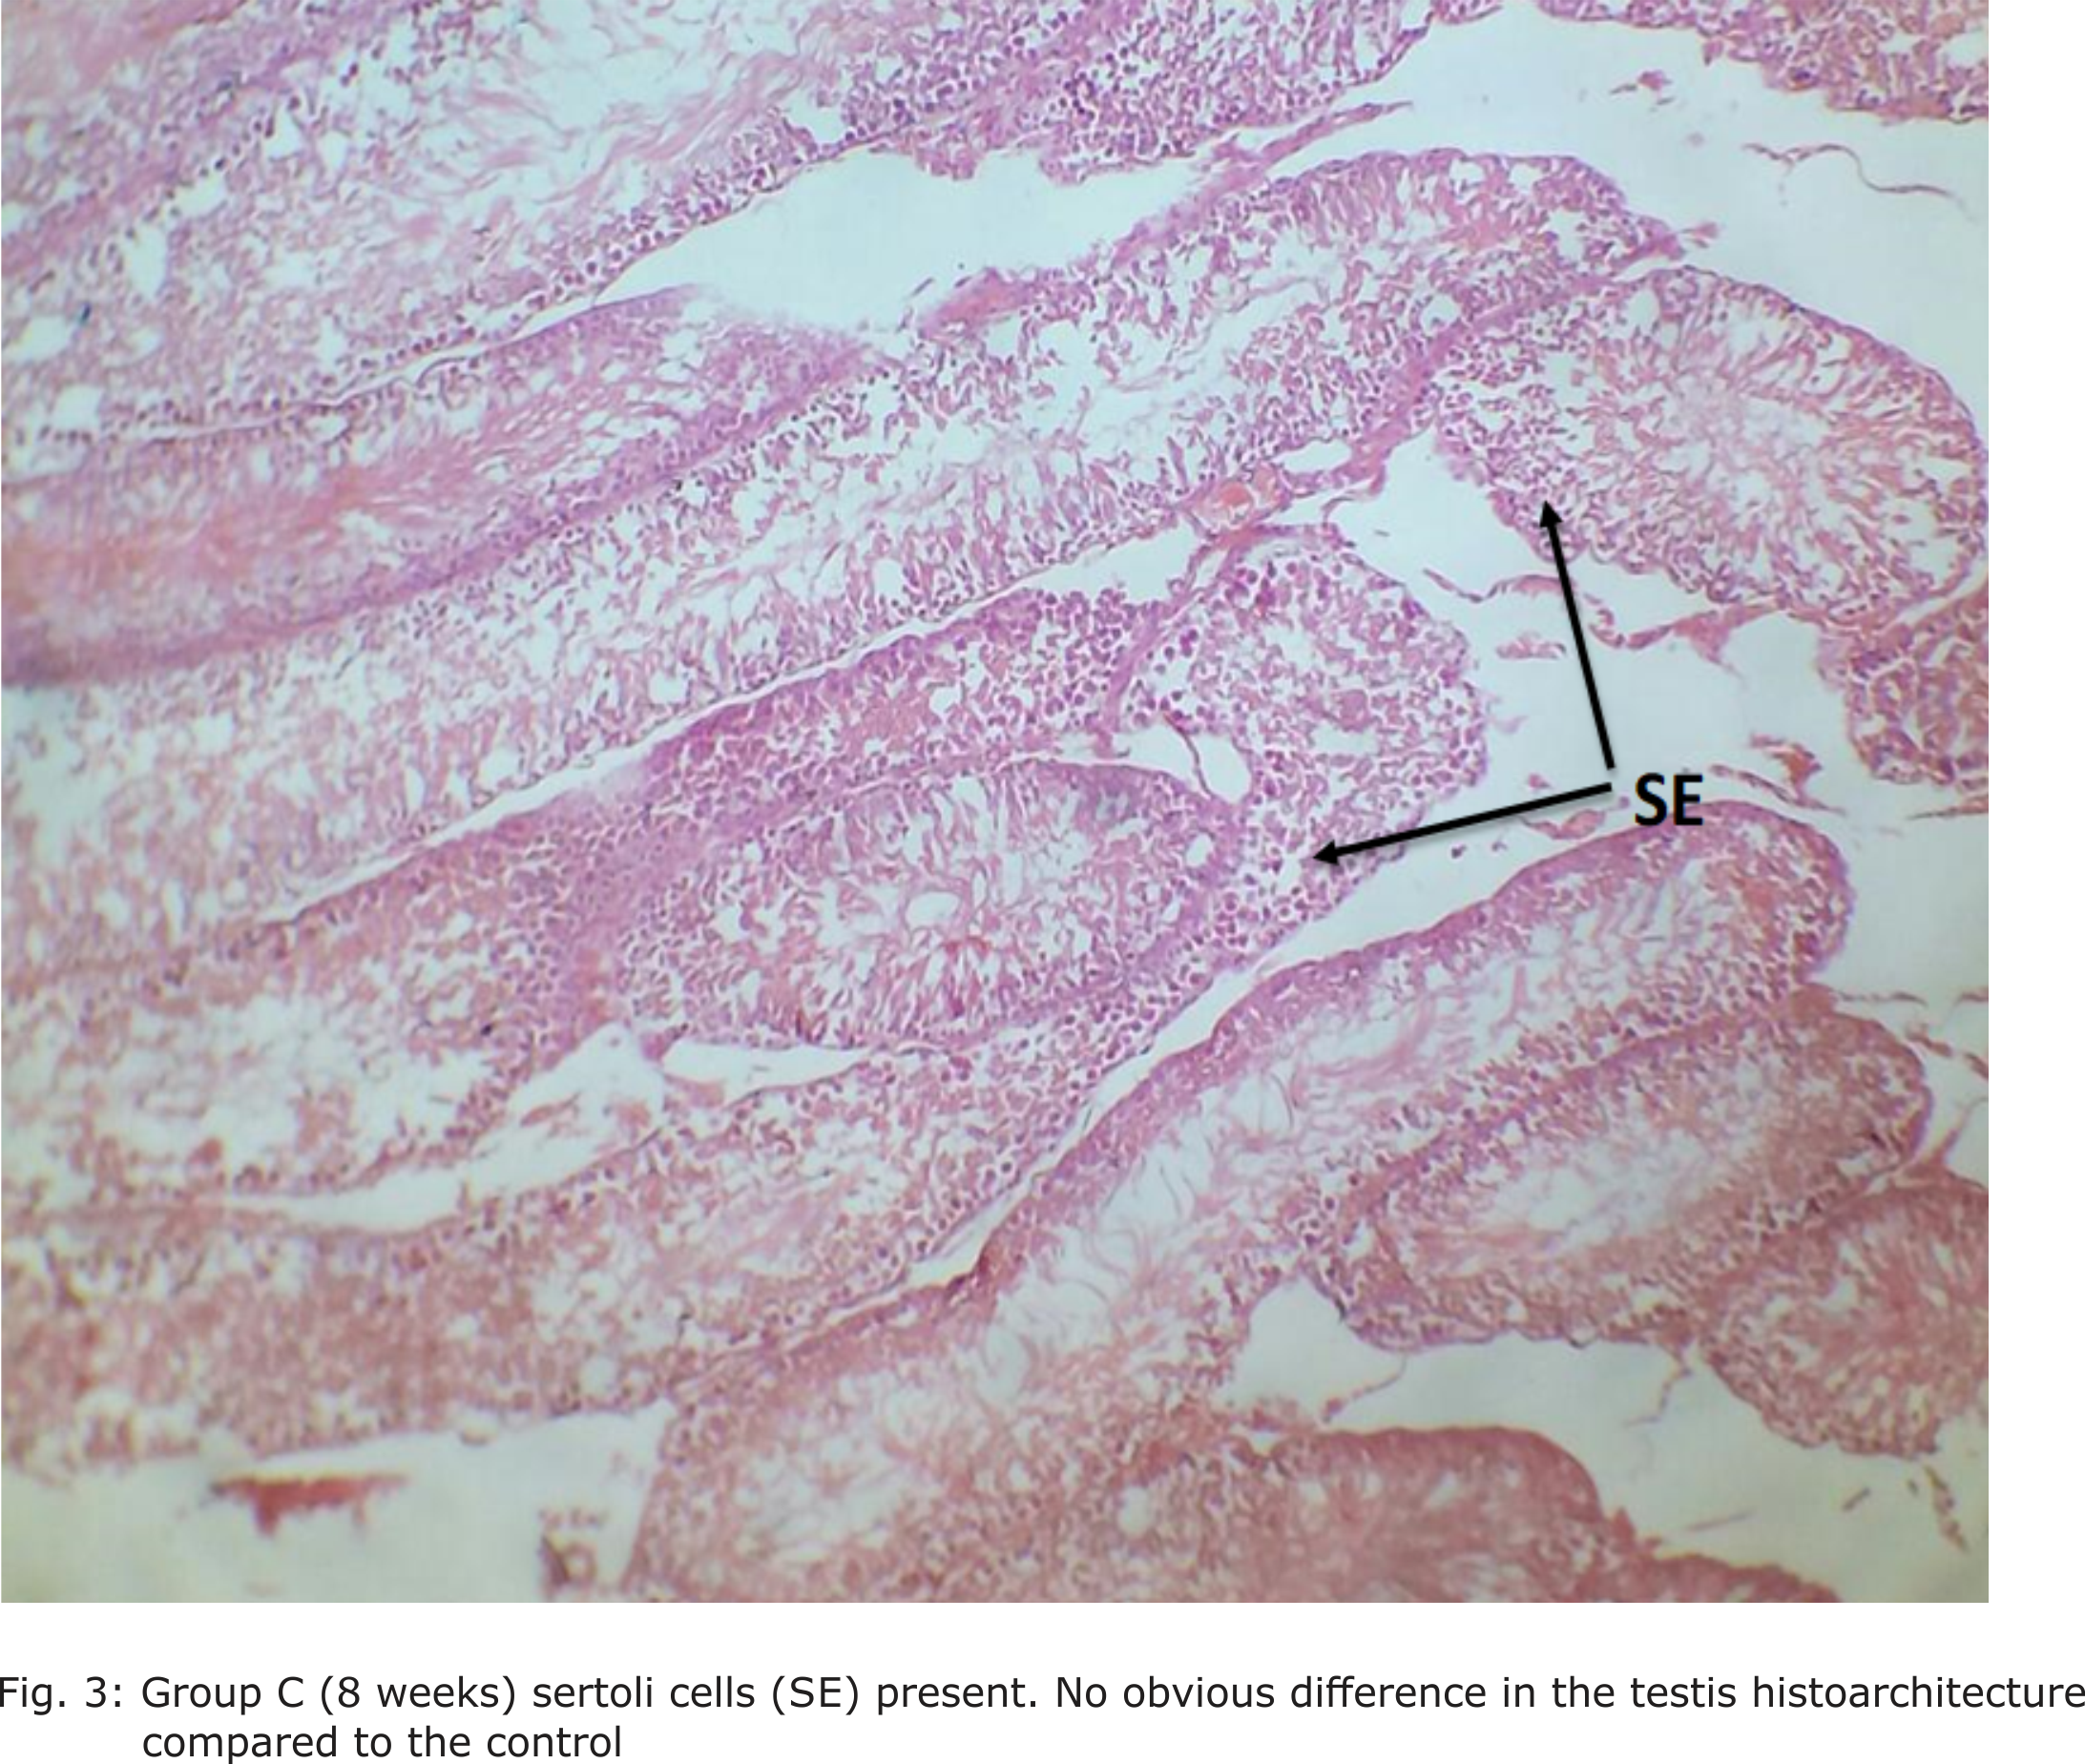 Fig. 3: Group C (8 weeks) sertoli cells (SE) present. No obvious difference in the testis histoarchitecture compared to the control